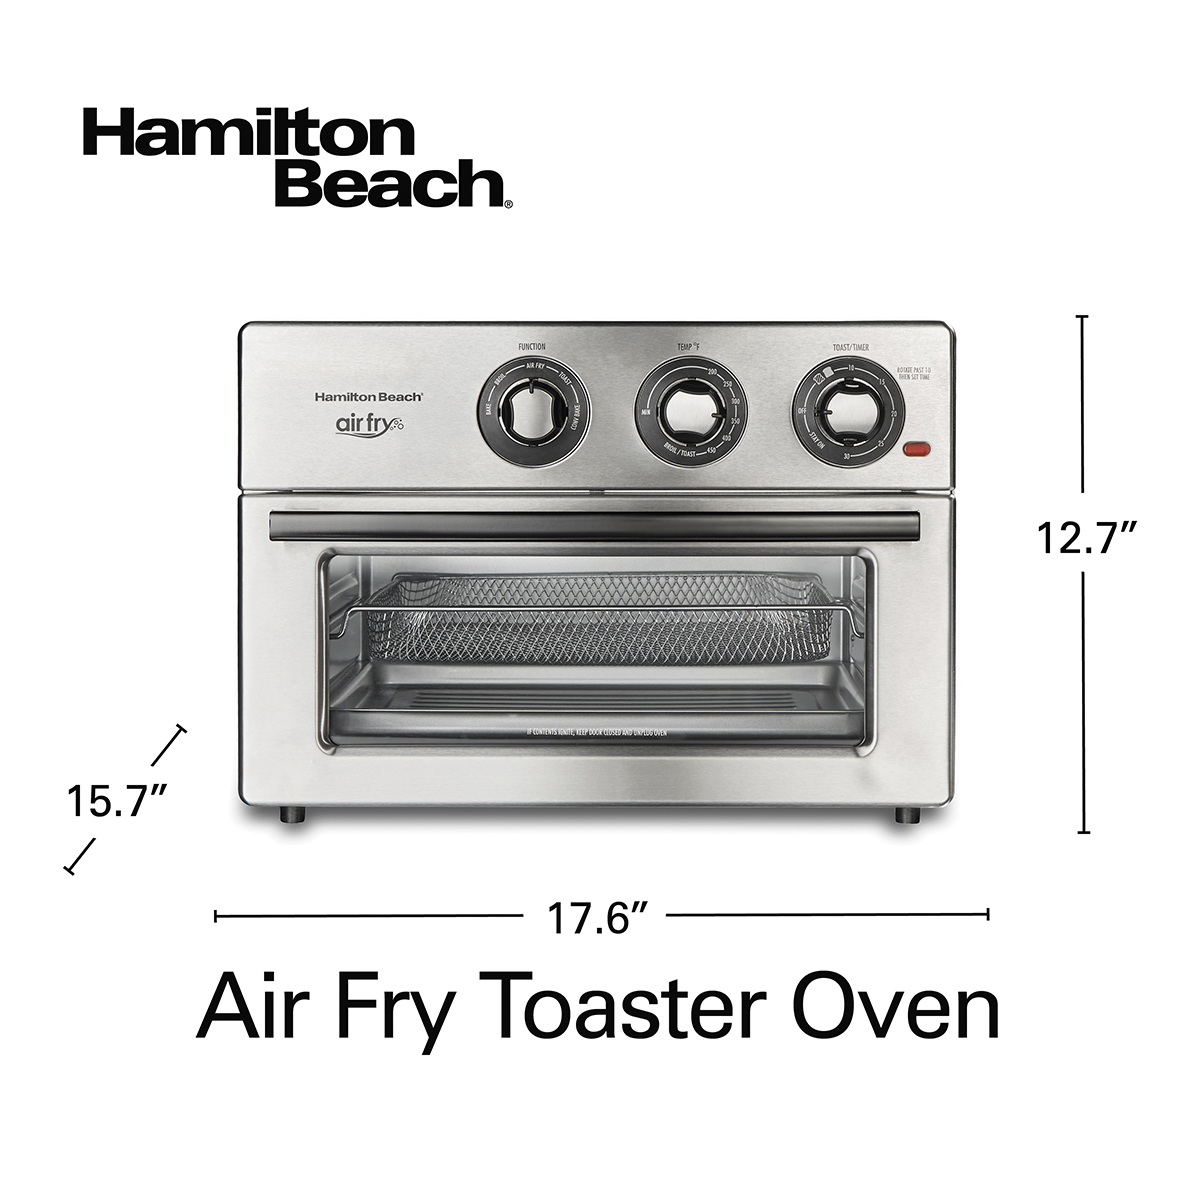 Stainless Steel 1800 Watts Bake Pan and Broil Rack 31225 Hamilton Beach Air Fryer Convection Countertop Toaster Oven with Frying Basket 